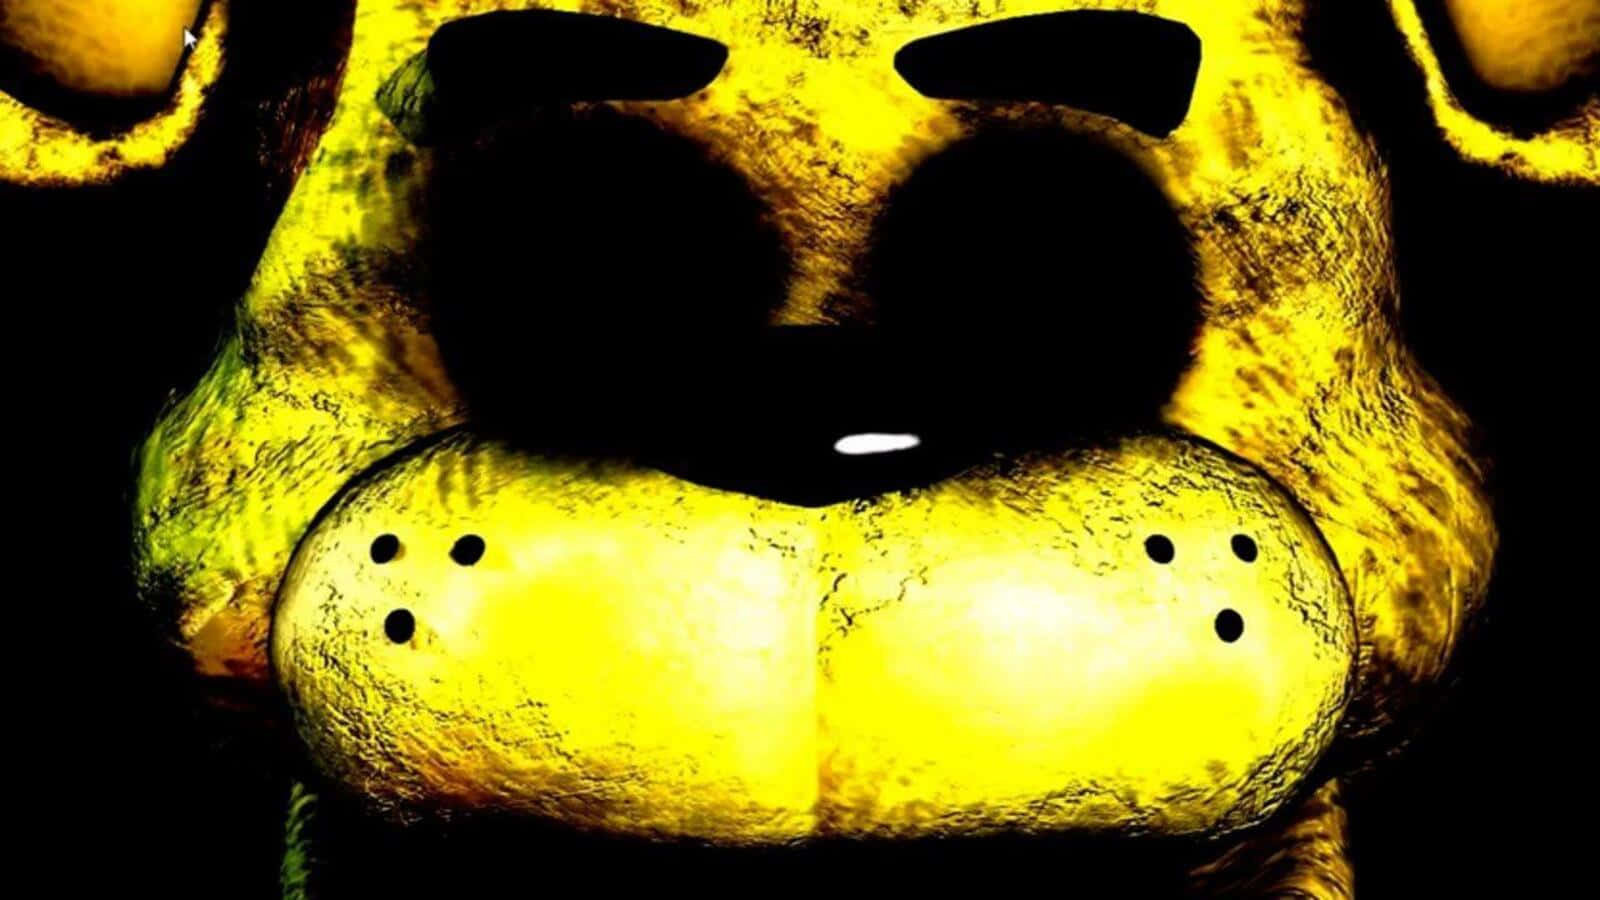 Caption: Mysterious Golden Freddy in the Shadows Wallpaper